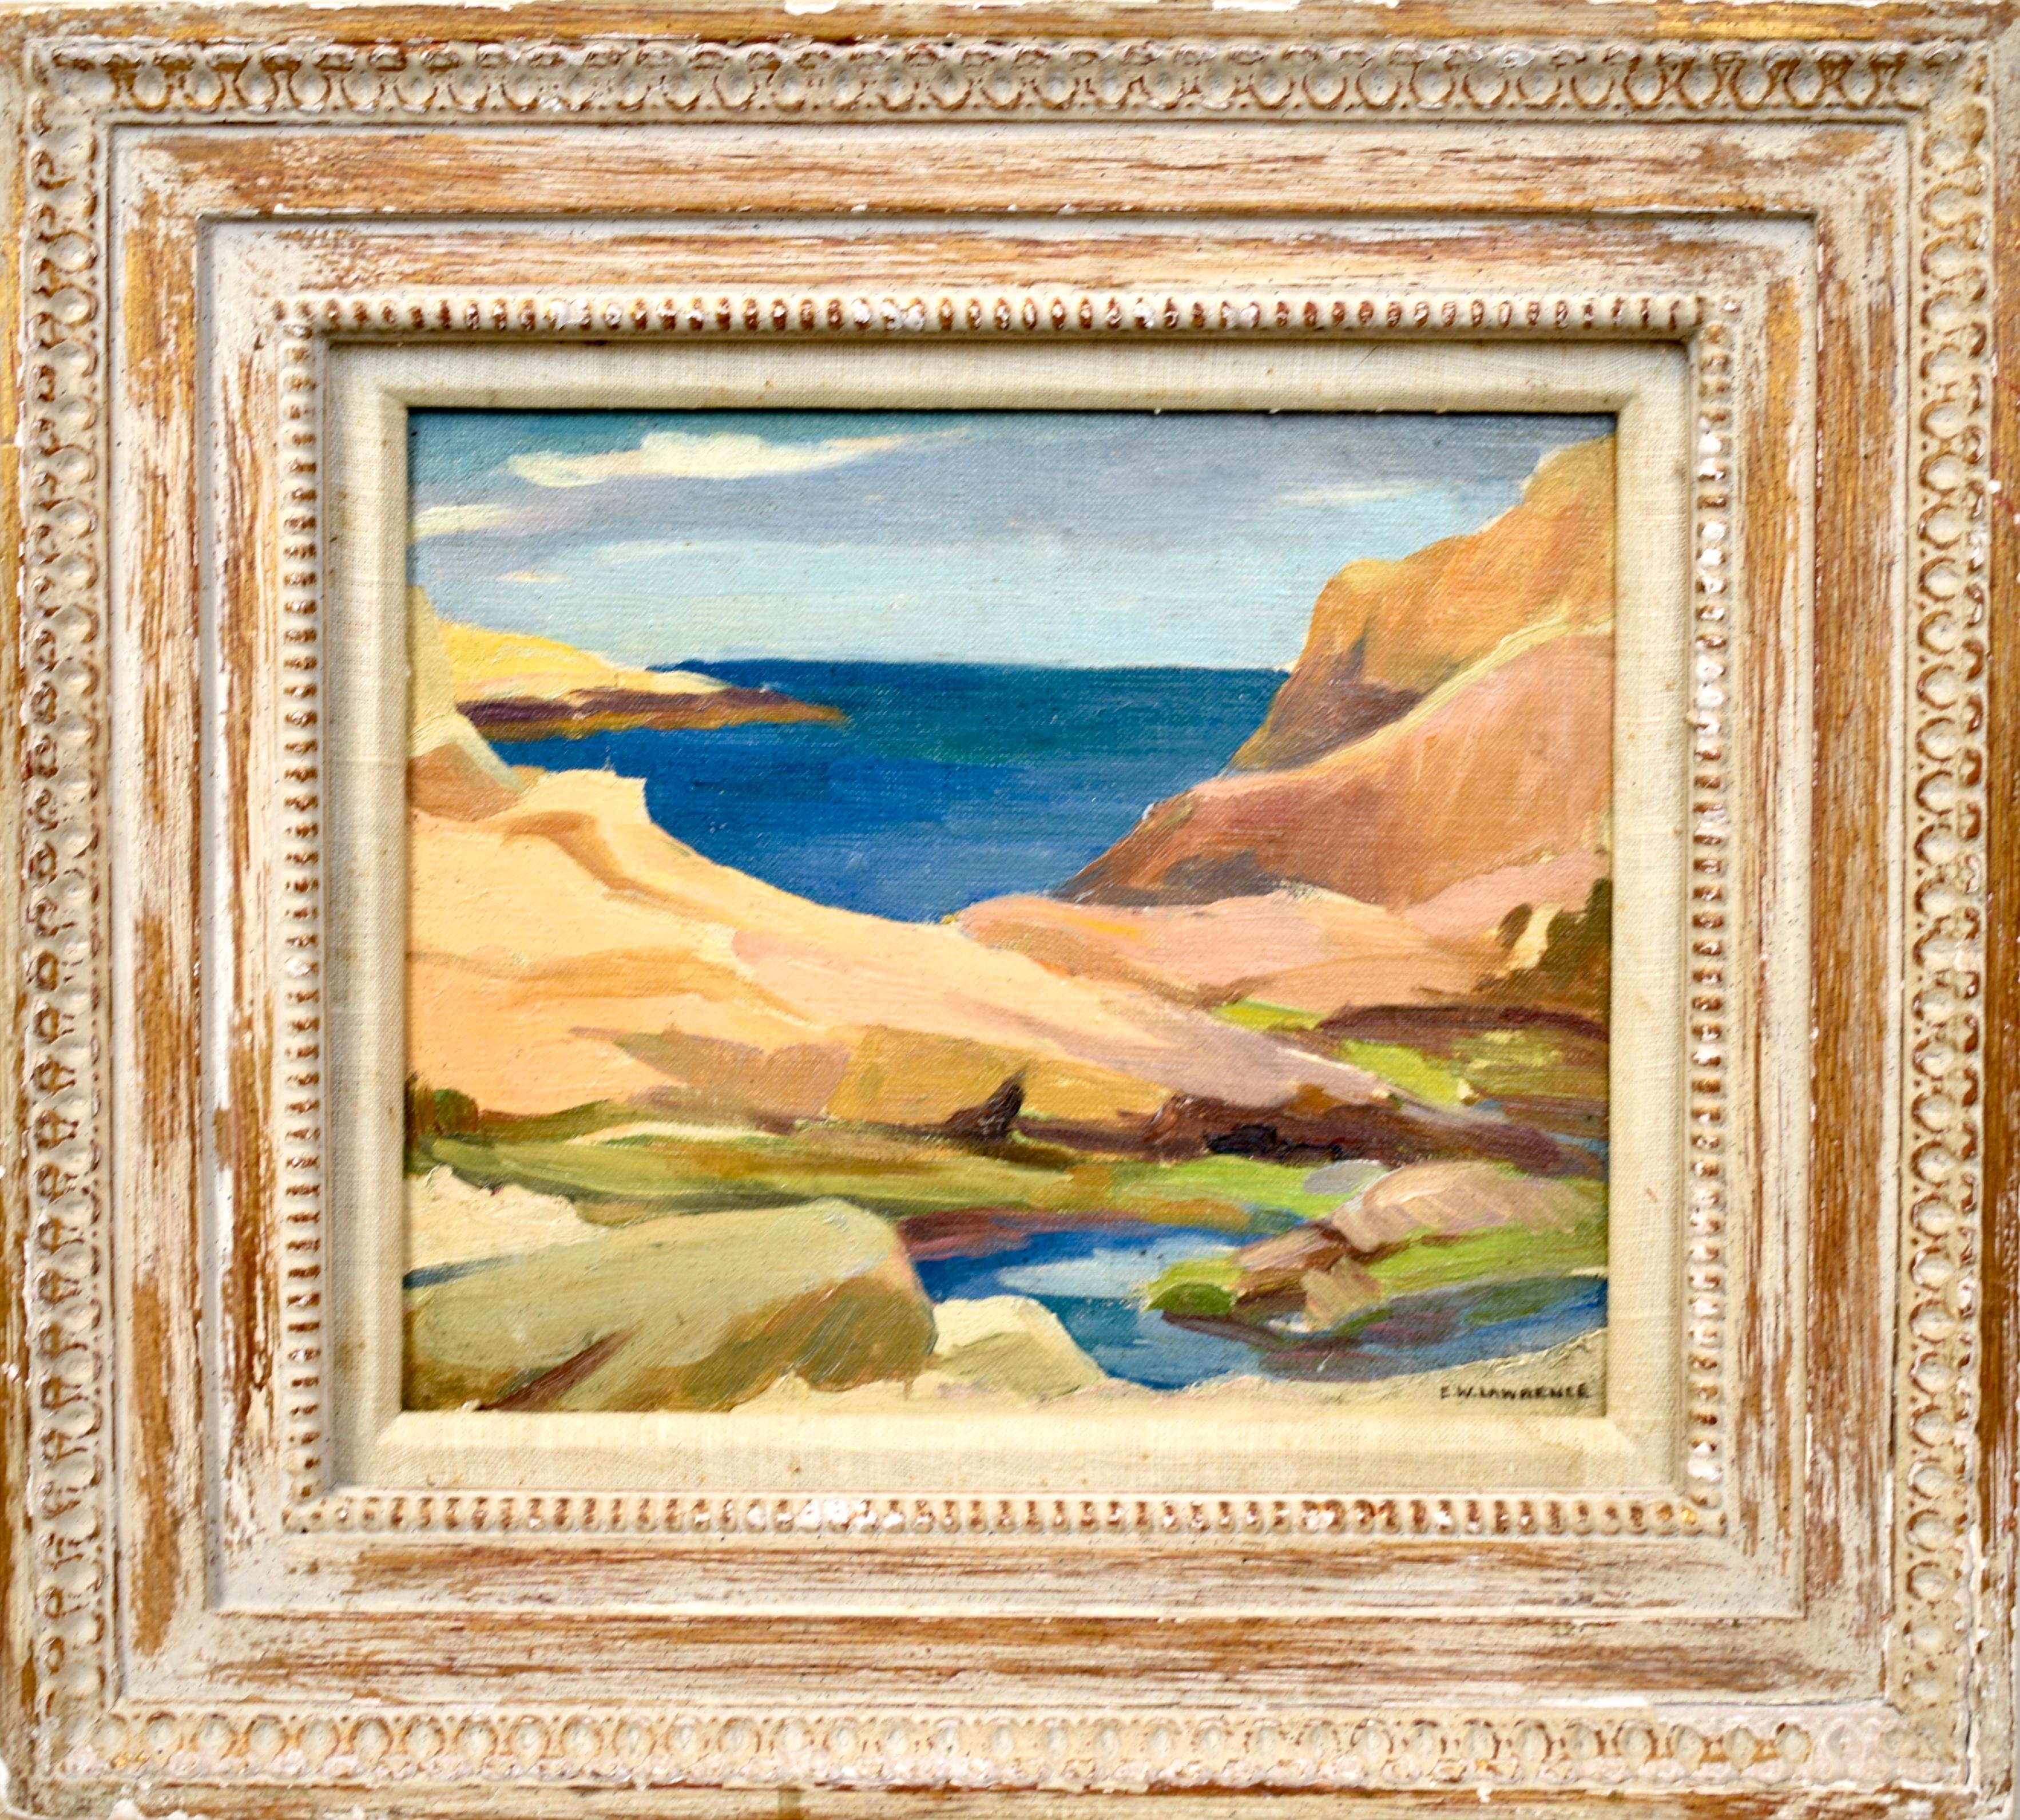 Modernist beach seascape painting by Edna Lawrence  (1898 - 1987).  Oil on board, circa 1930.  Signed lower right.  Displayed in a modernist frame.  Image size, 12"L x 10"H.